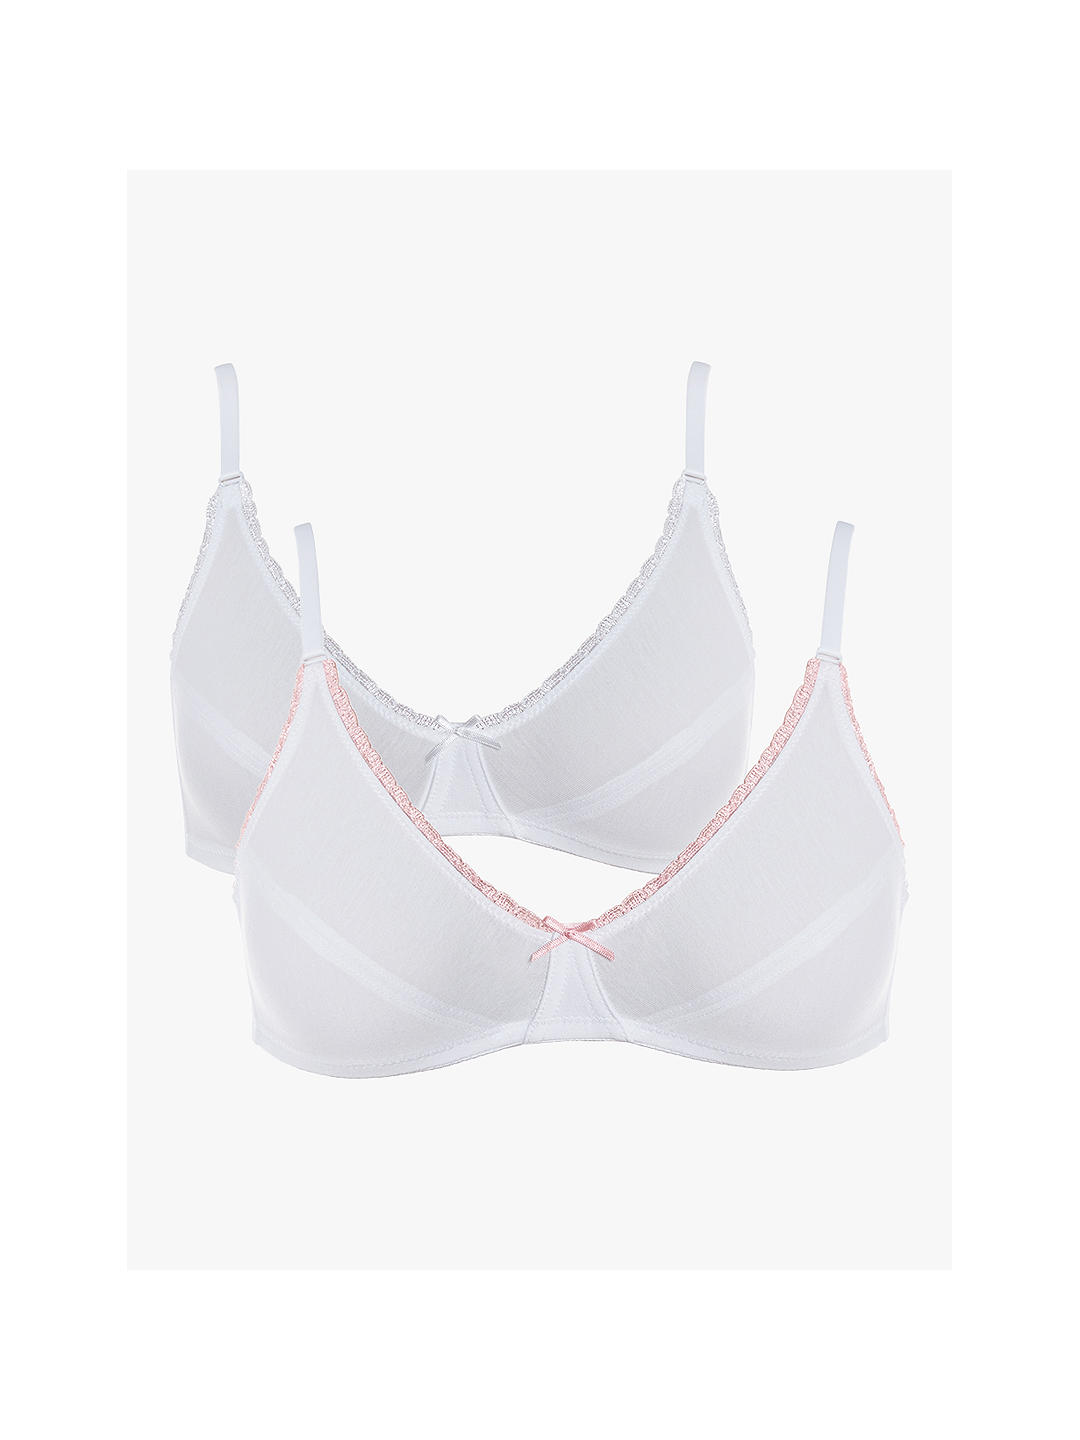 Royce Petite Cotton Non-Wired Bra, Pack of 2, White/Pink